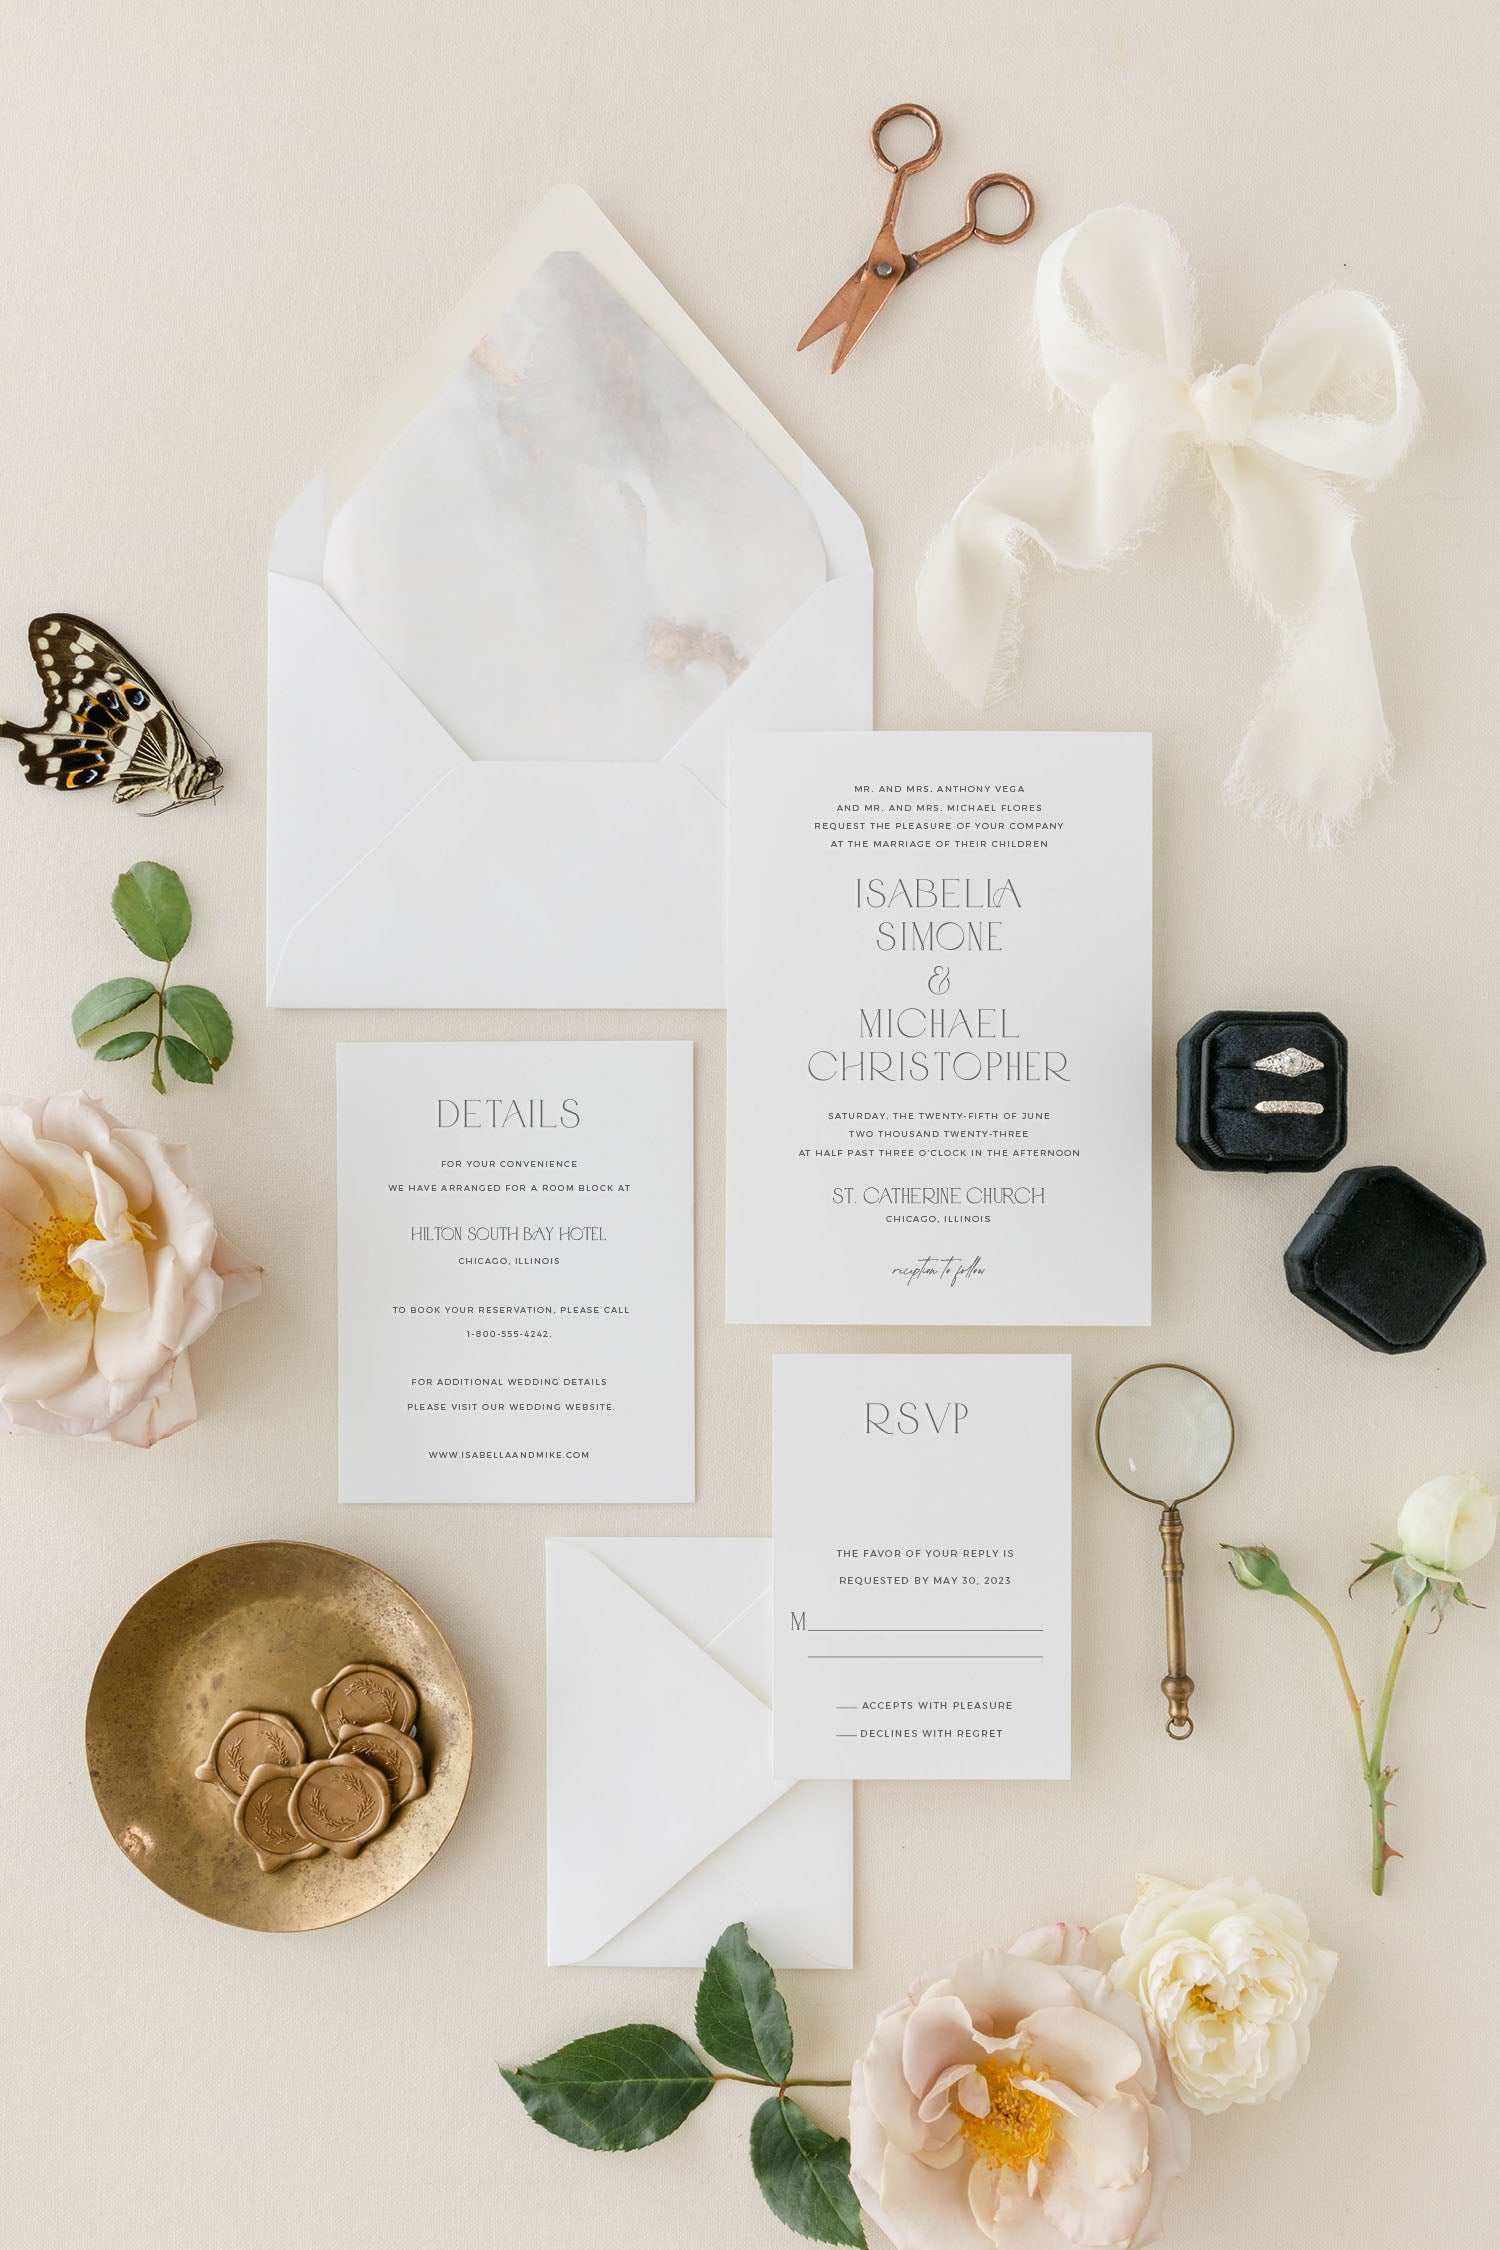 Common Wedding Invitation Mistakes And How To Avoid Them.jpg